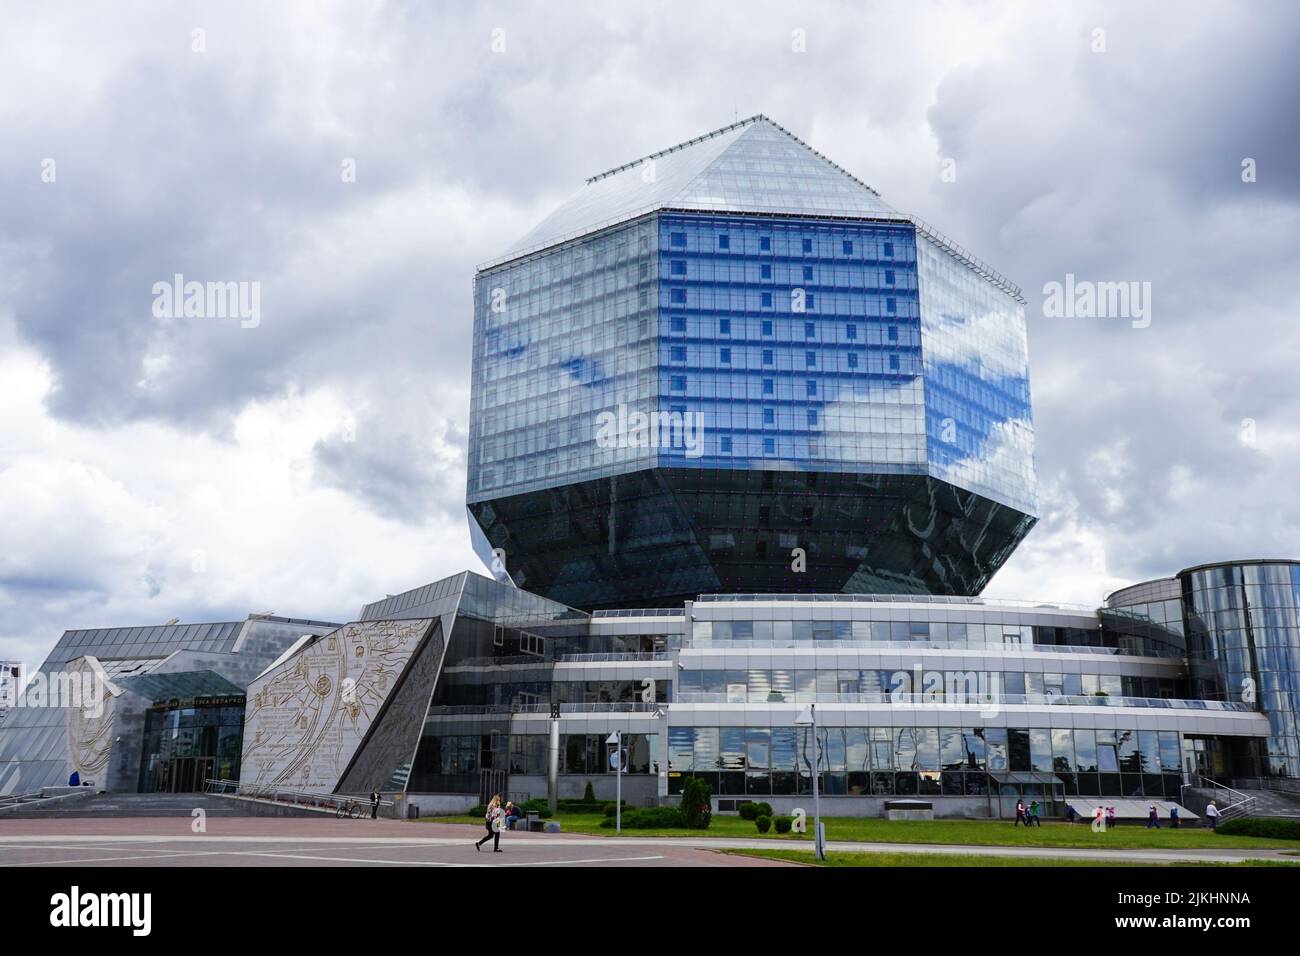 The landmark National Library of Belarus in Minsk with a modernised 8 angles glass shaped Stock Photo